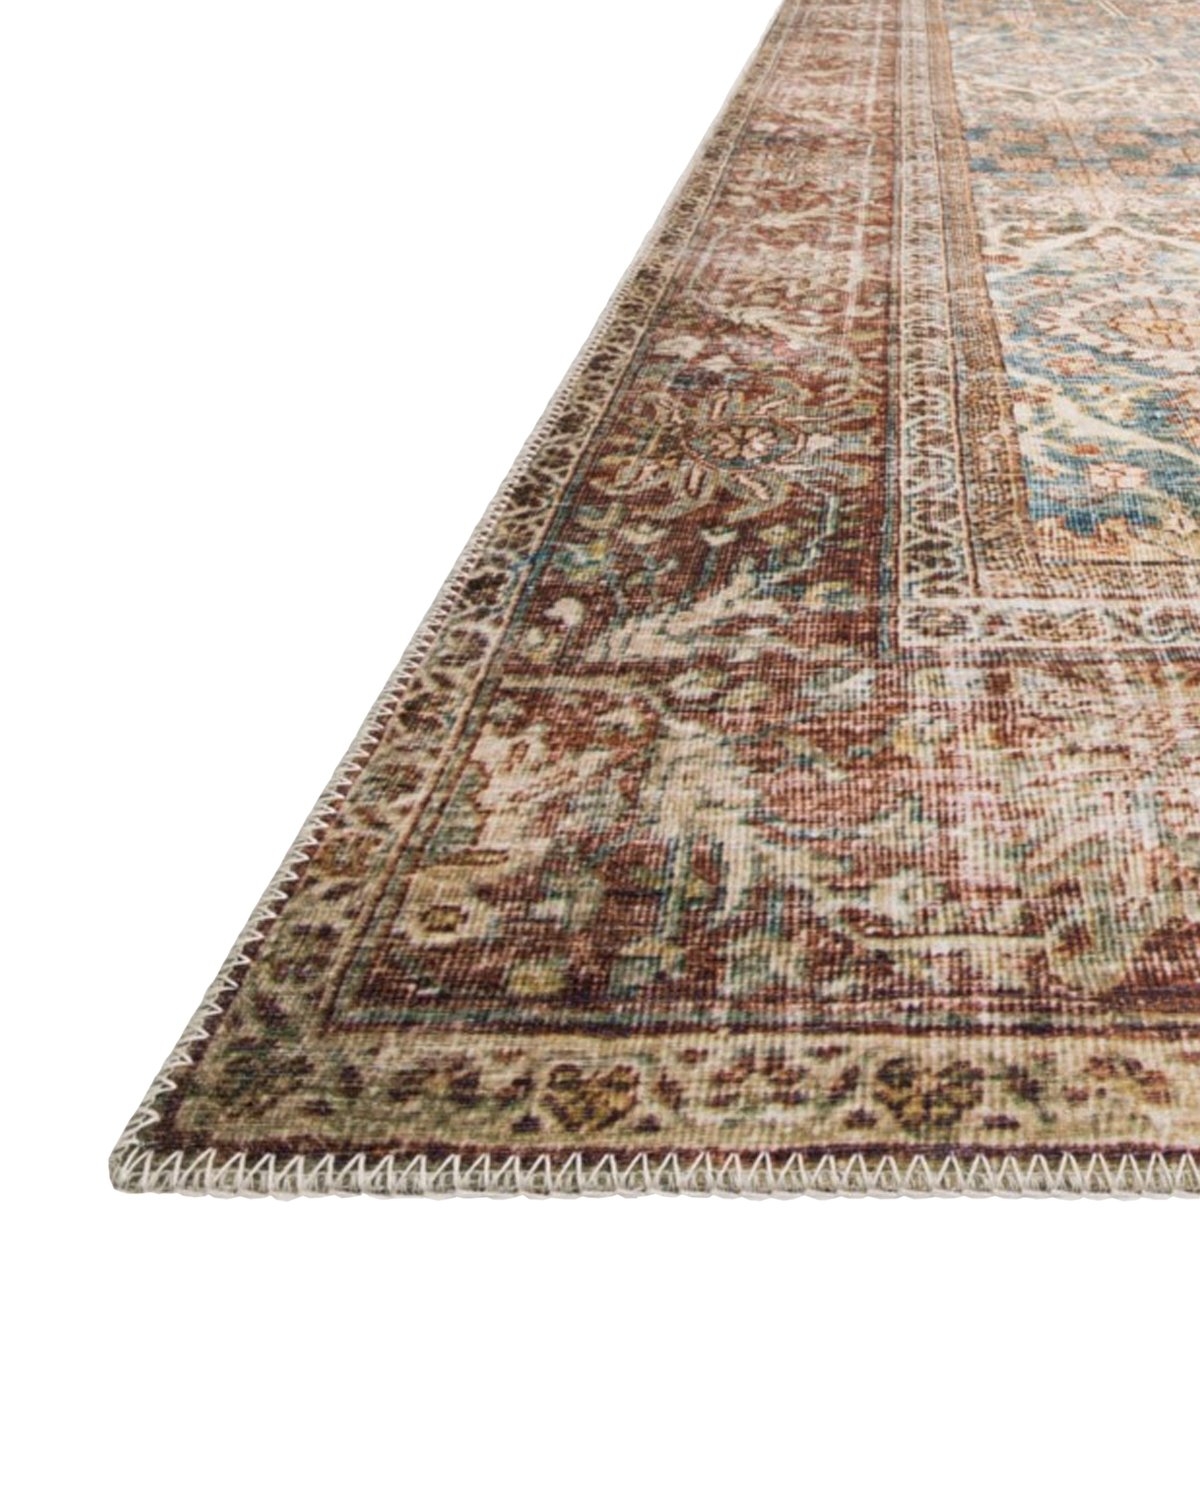 TUNIS PATTERNED RUG, 7'6" x 9'6" - Image 2